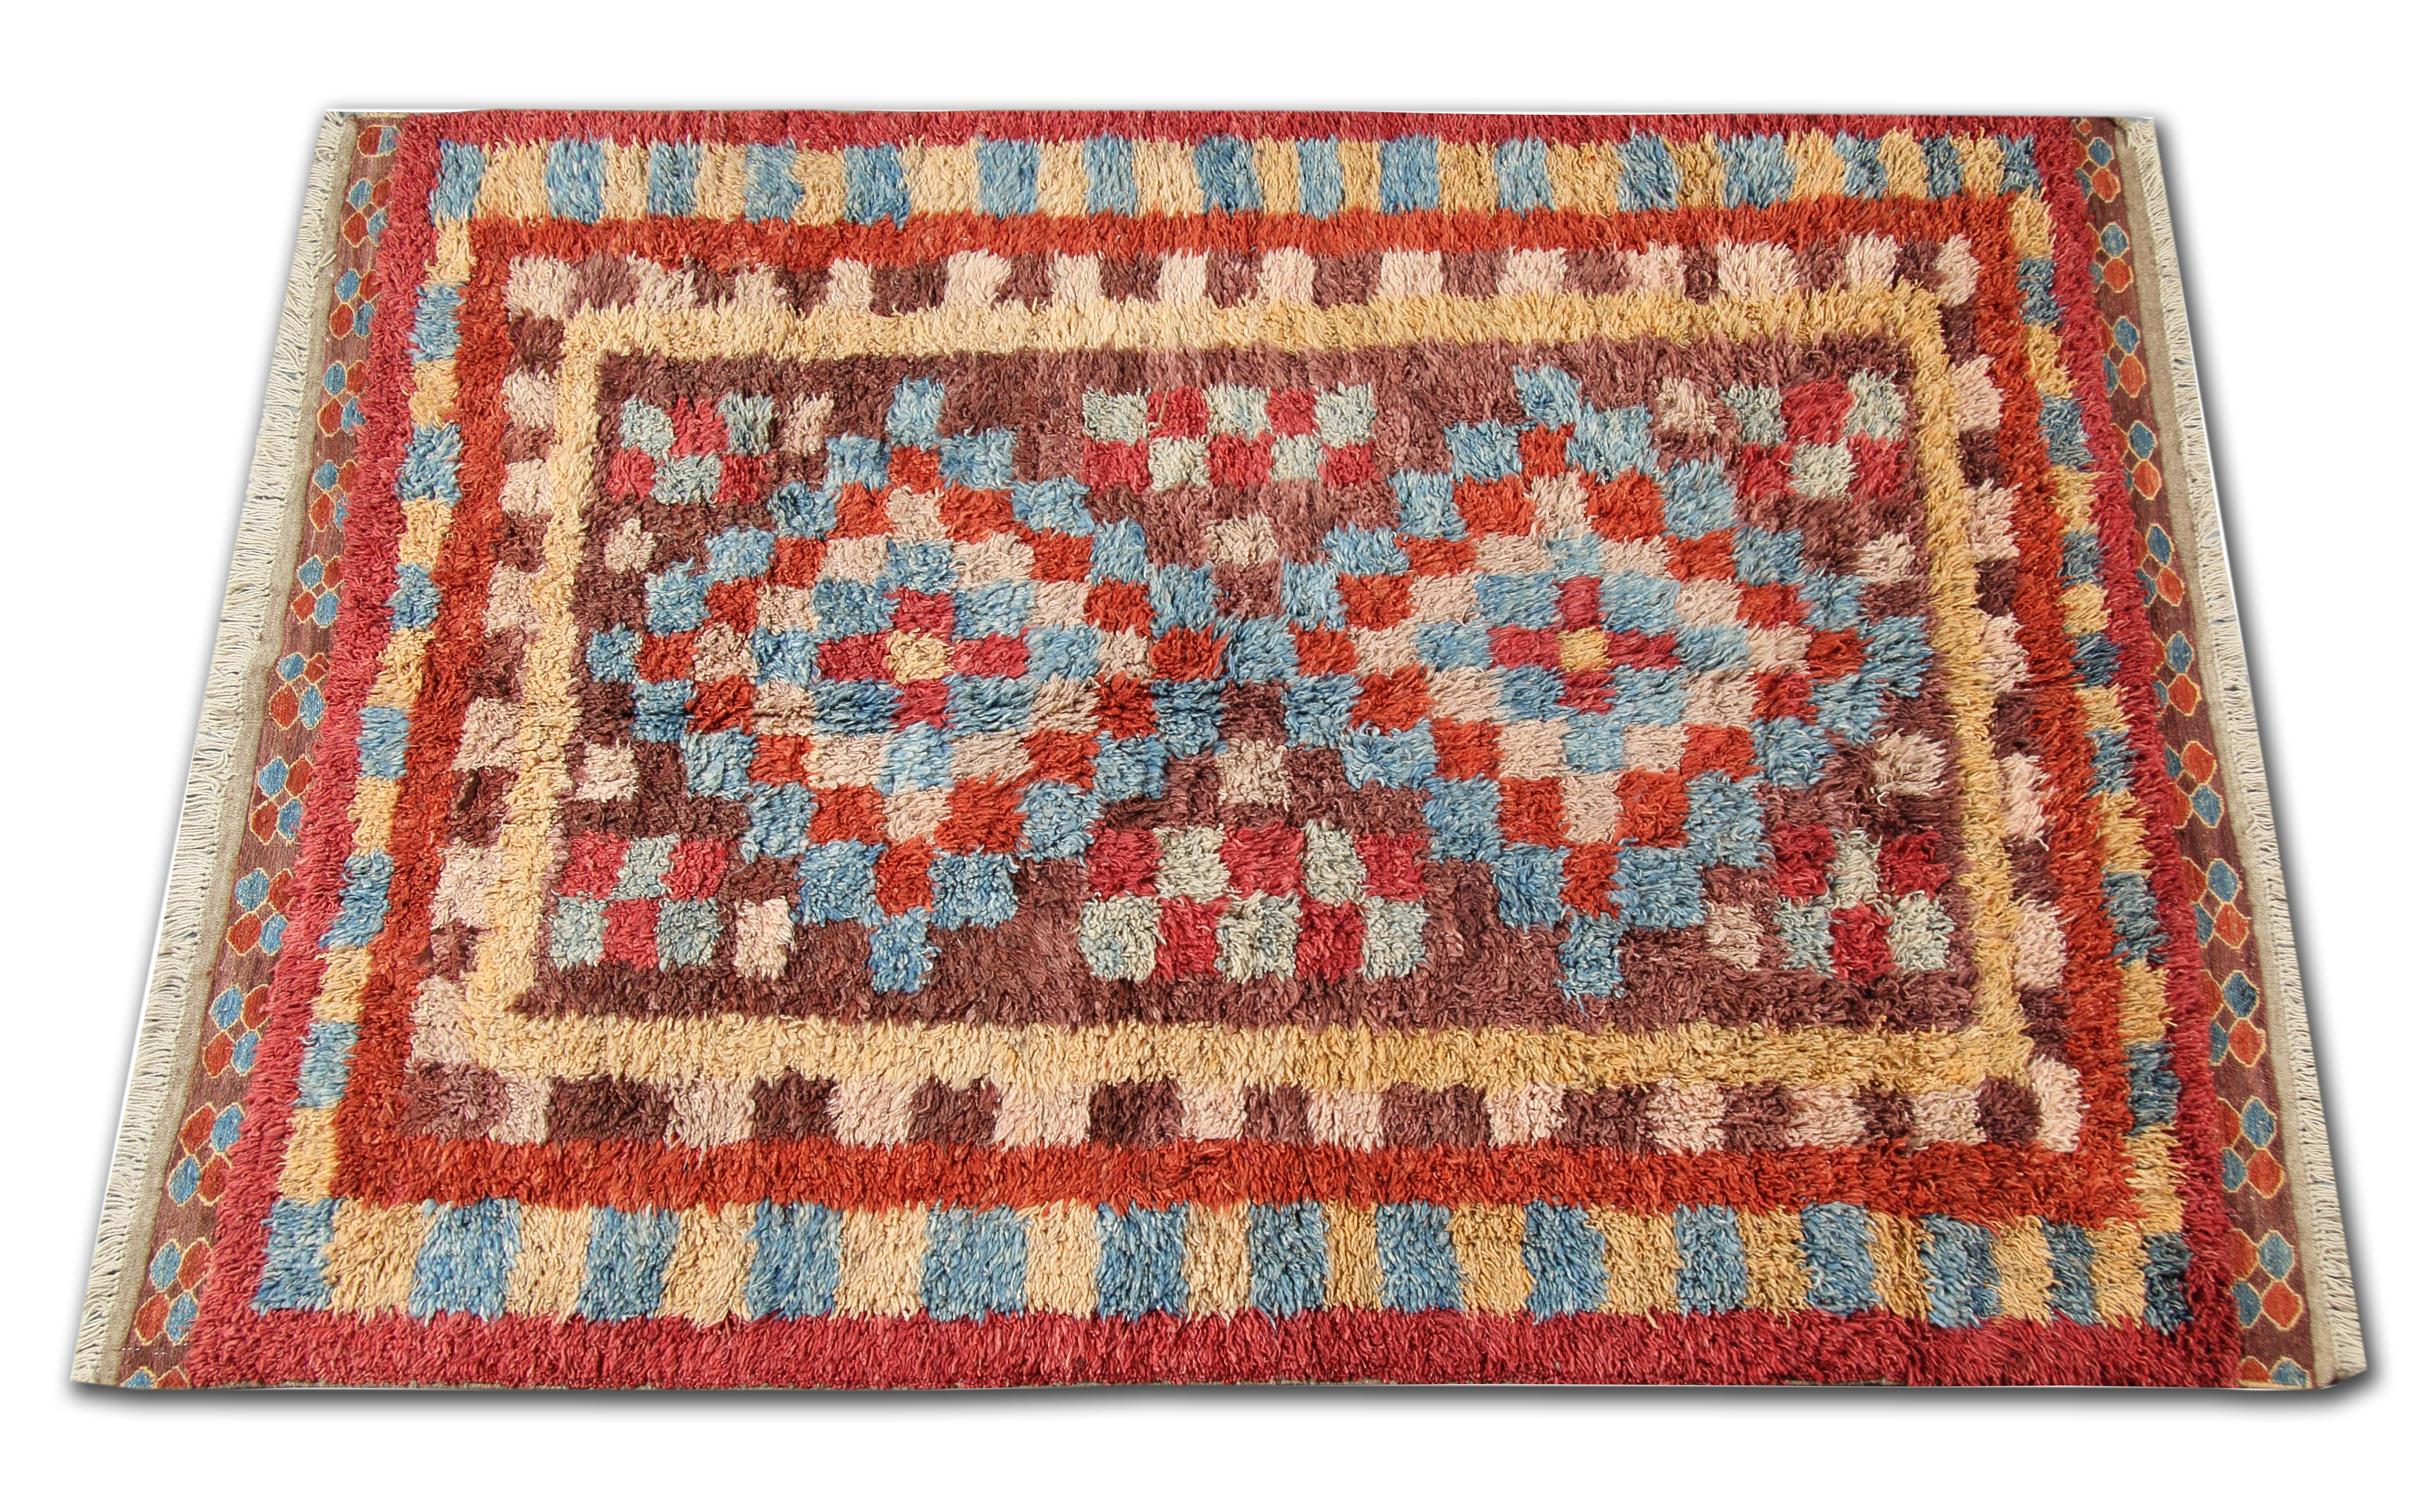 This is an example of a handwoven rug, which is featuring designs from the Morocco region. Morocco is famous for its primitive traditional rugs with long pile. Weavers used top quality wool and cotton for the production of this red rug. This tribal